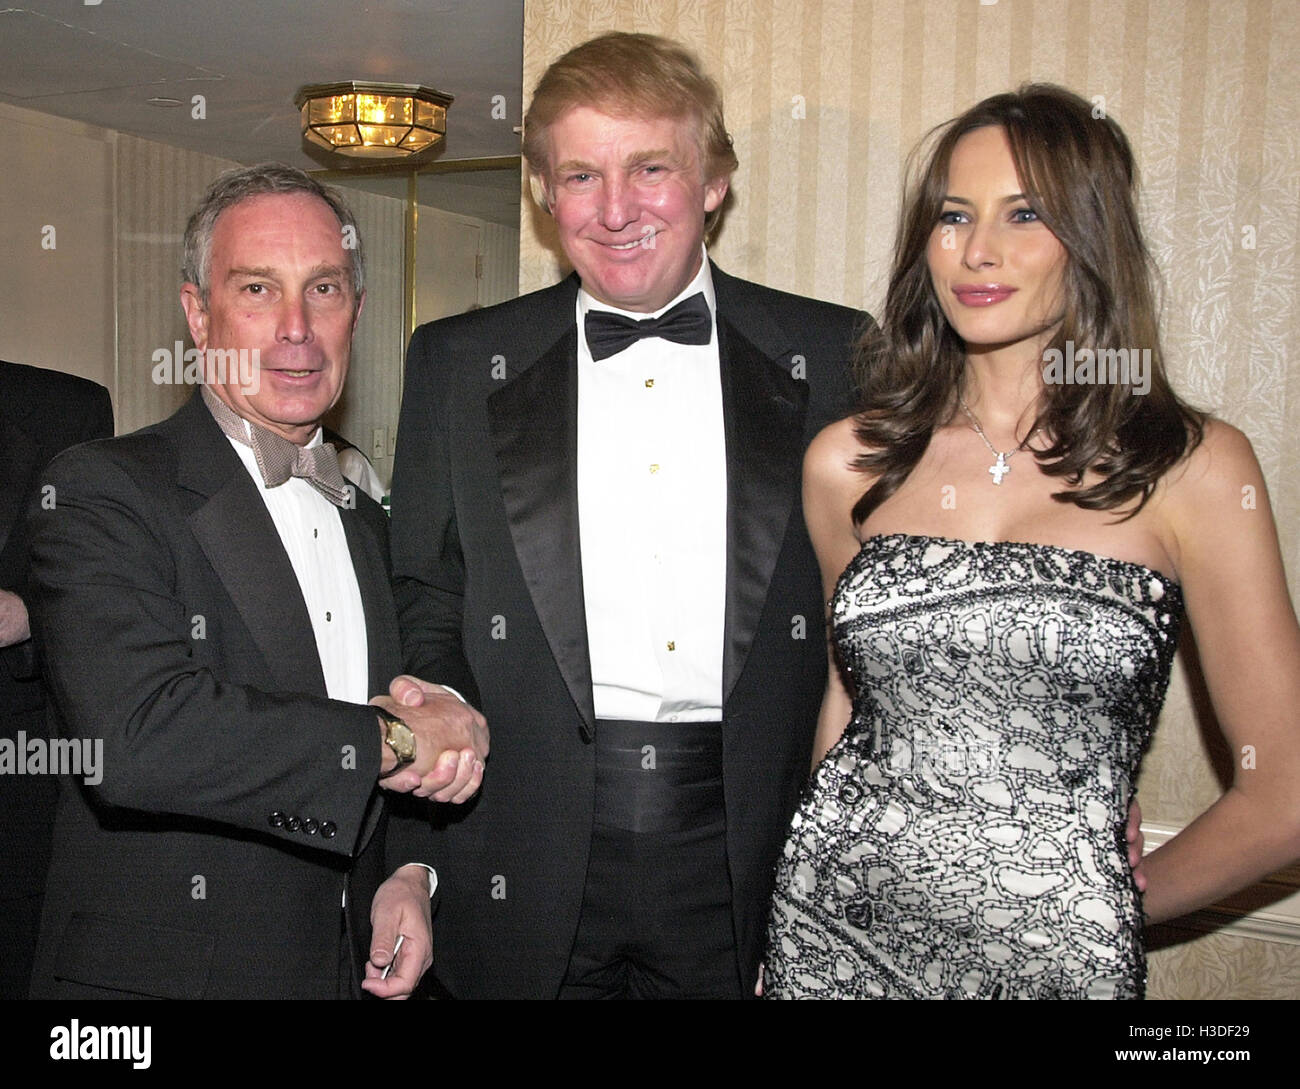 Mayor Michael Bloomberg (Republican of New York) welcomes Donald Trump and Melania Knauss to his hospitality suite prior to the White House Correspondents Association Dinner at the Washington Hilton Hotel in Washington, DC on April 28, 2001. Credit: Ron S Stock Photo